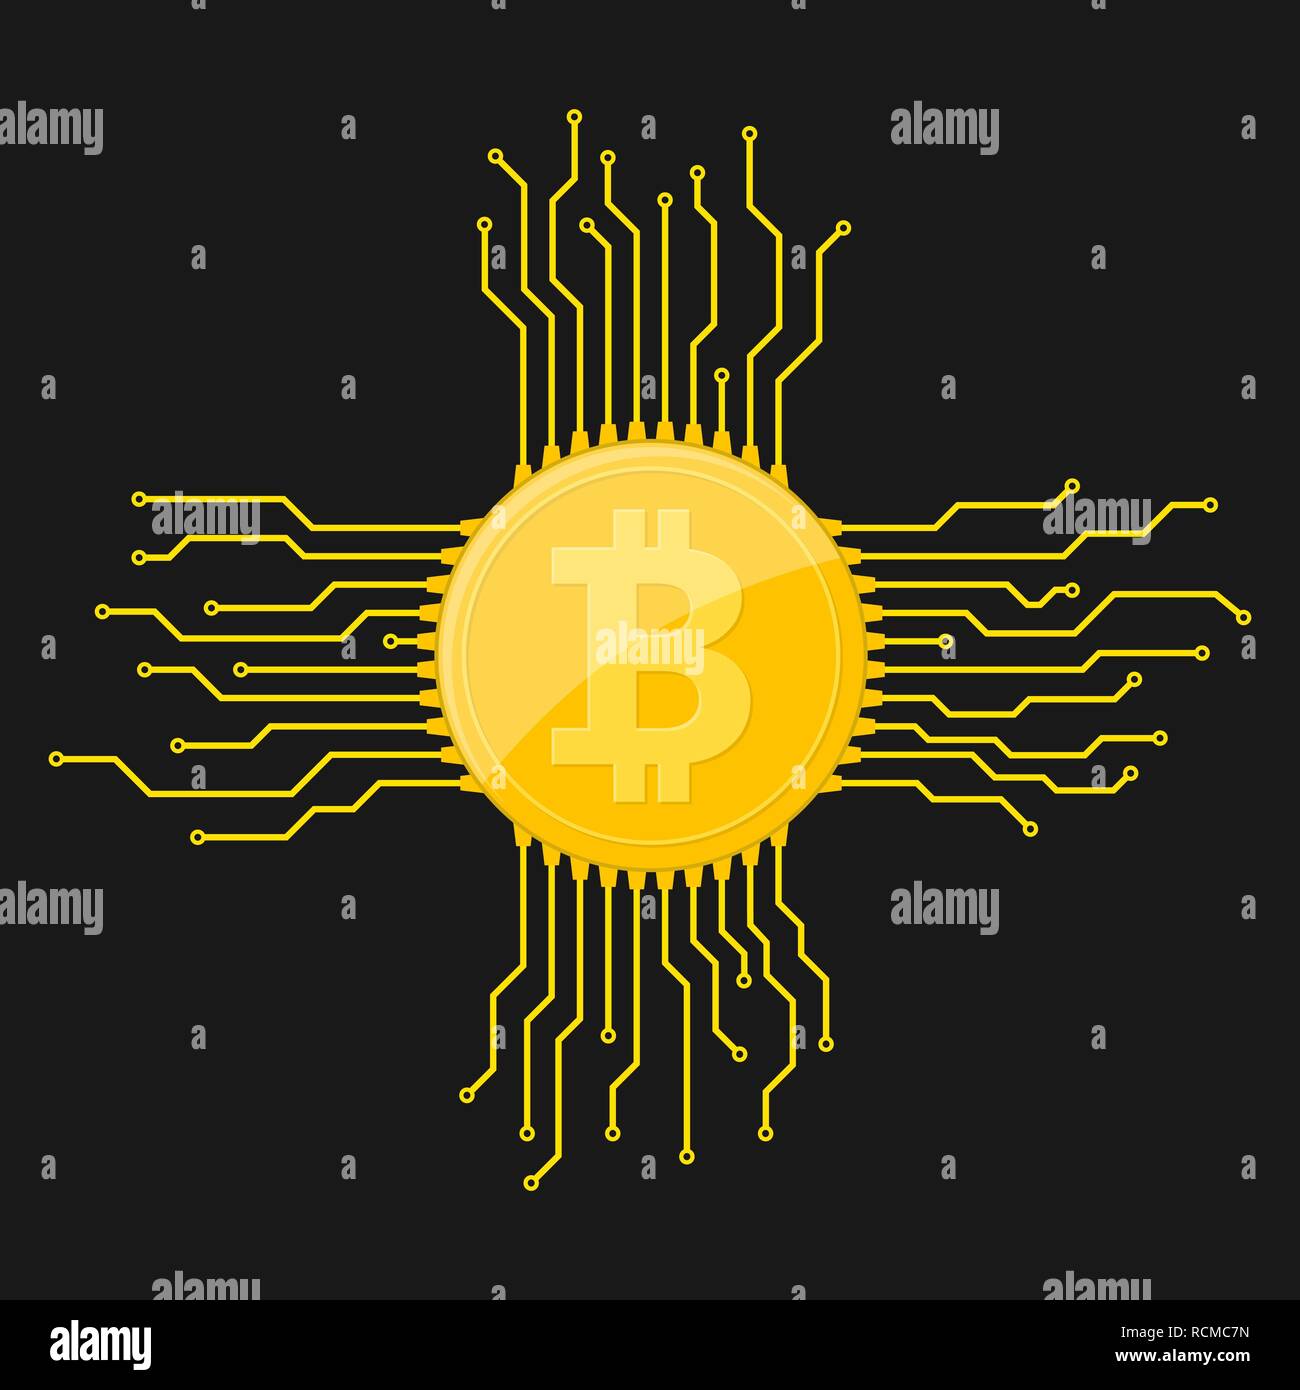 Bitcoin digital currency icon with circuit board elements. Vector illustration. Bitcoin icon in a flat designs. Stock Vector